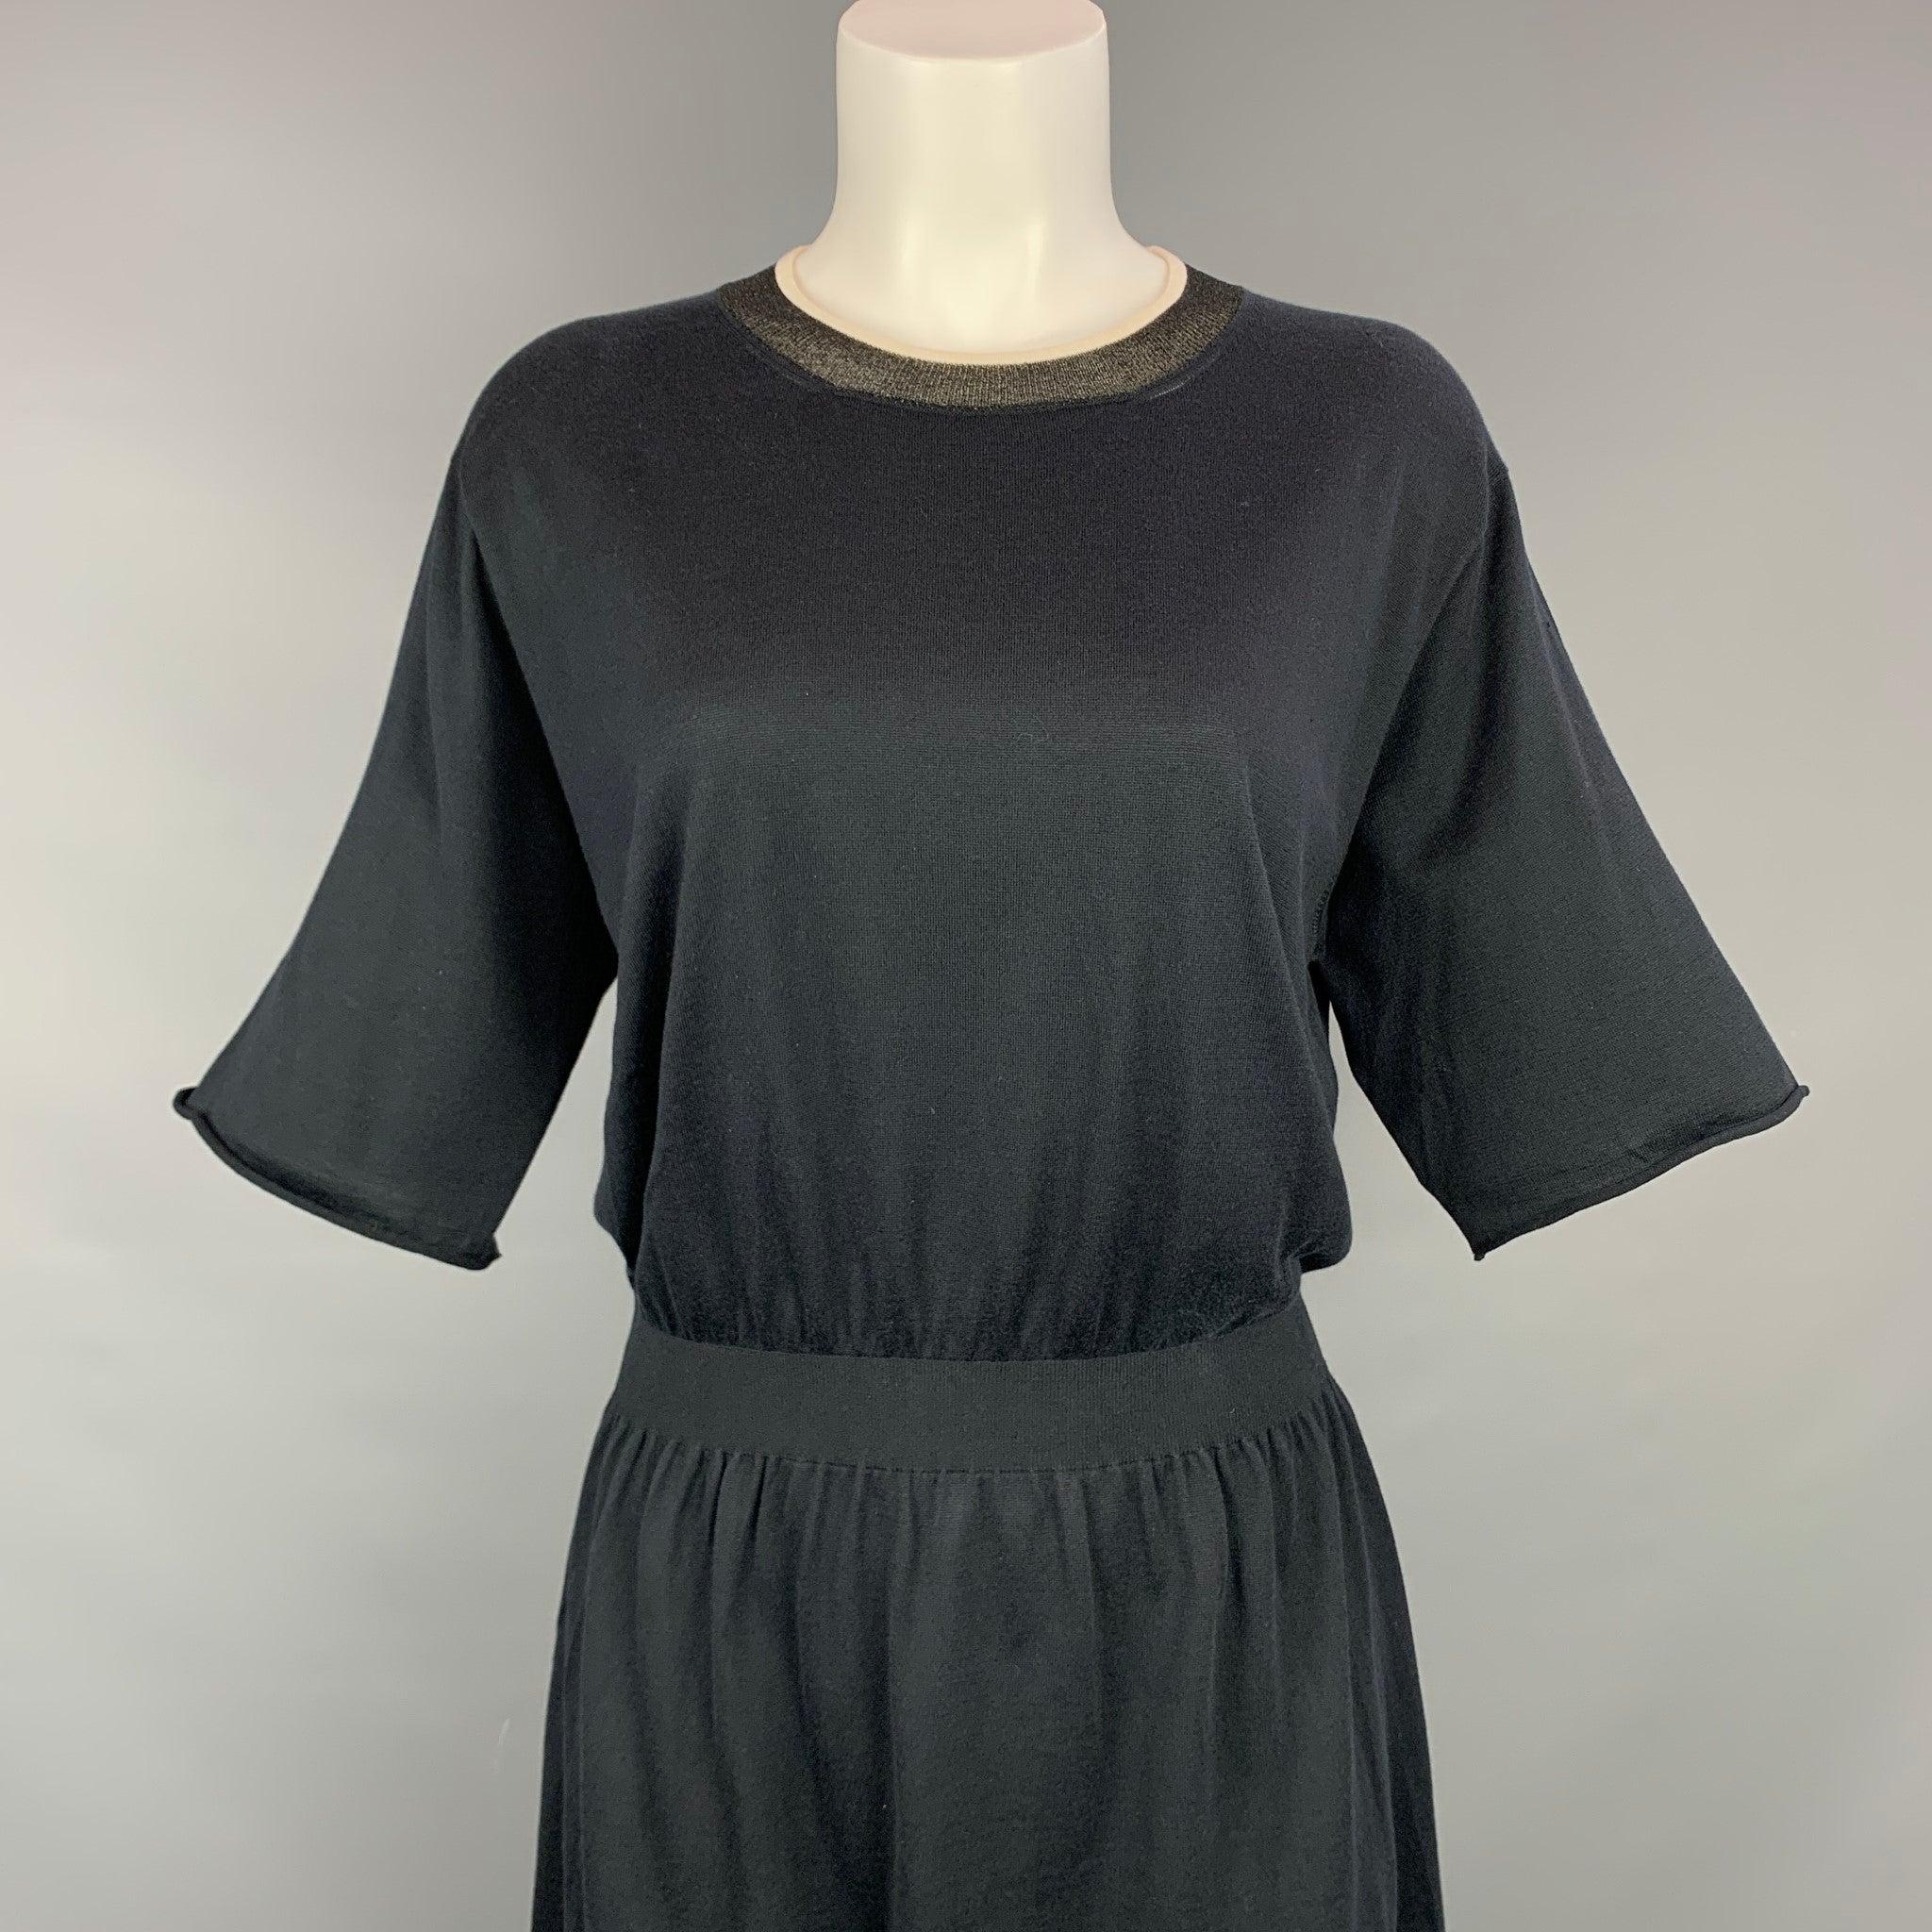 LOUIS VUITTON dress comes in a black knitted silk / cotton featuring a elastic waist, ribbed hem, short sleeves, and a crew-neck. Made in Italy.New With Tags.  
 

 Marked:  L 
 

 Measurements: 
  
 Shoulder: 17 inches Bust: 36 inches Waist: 28